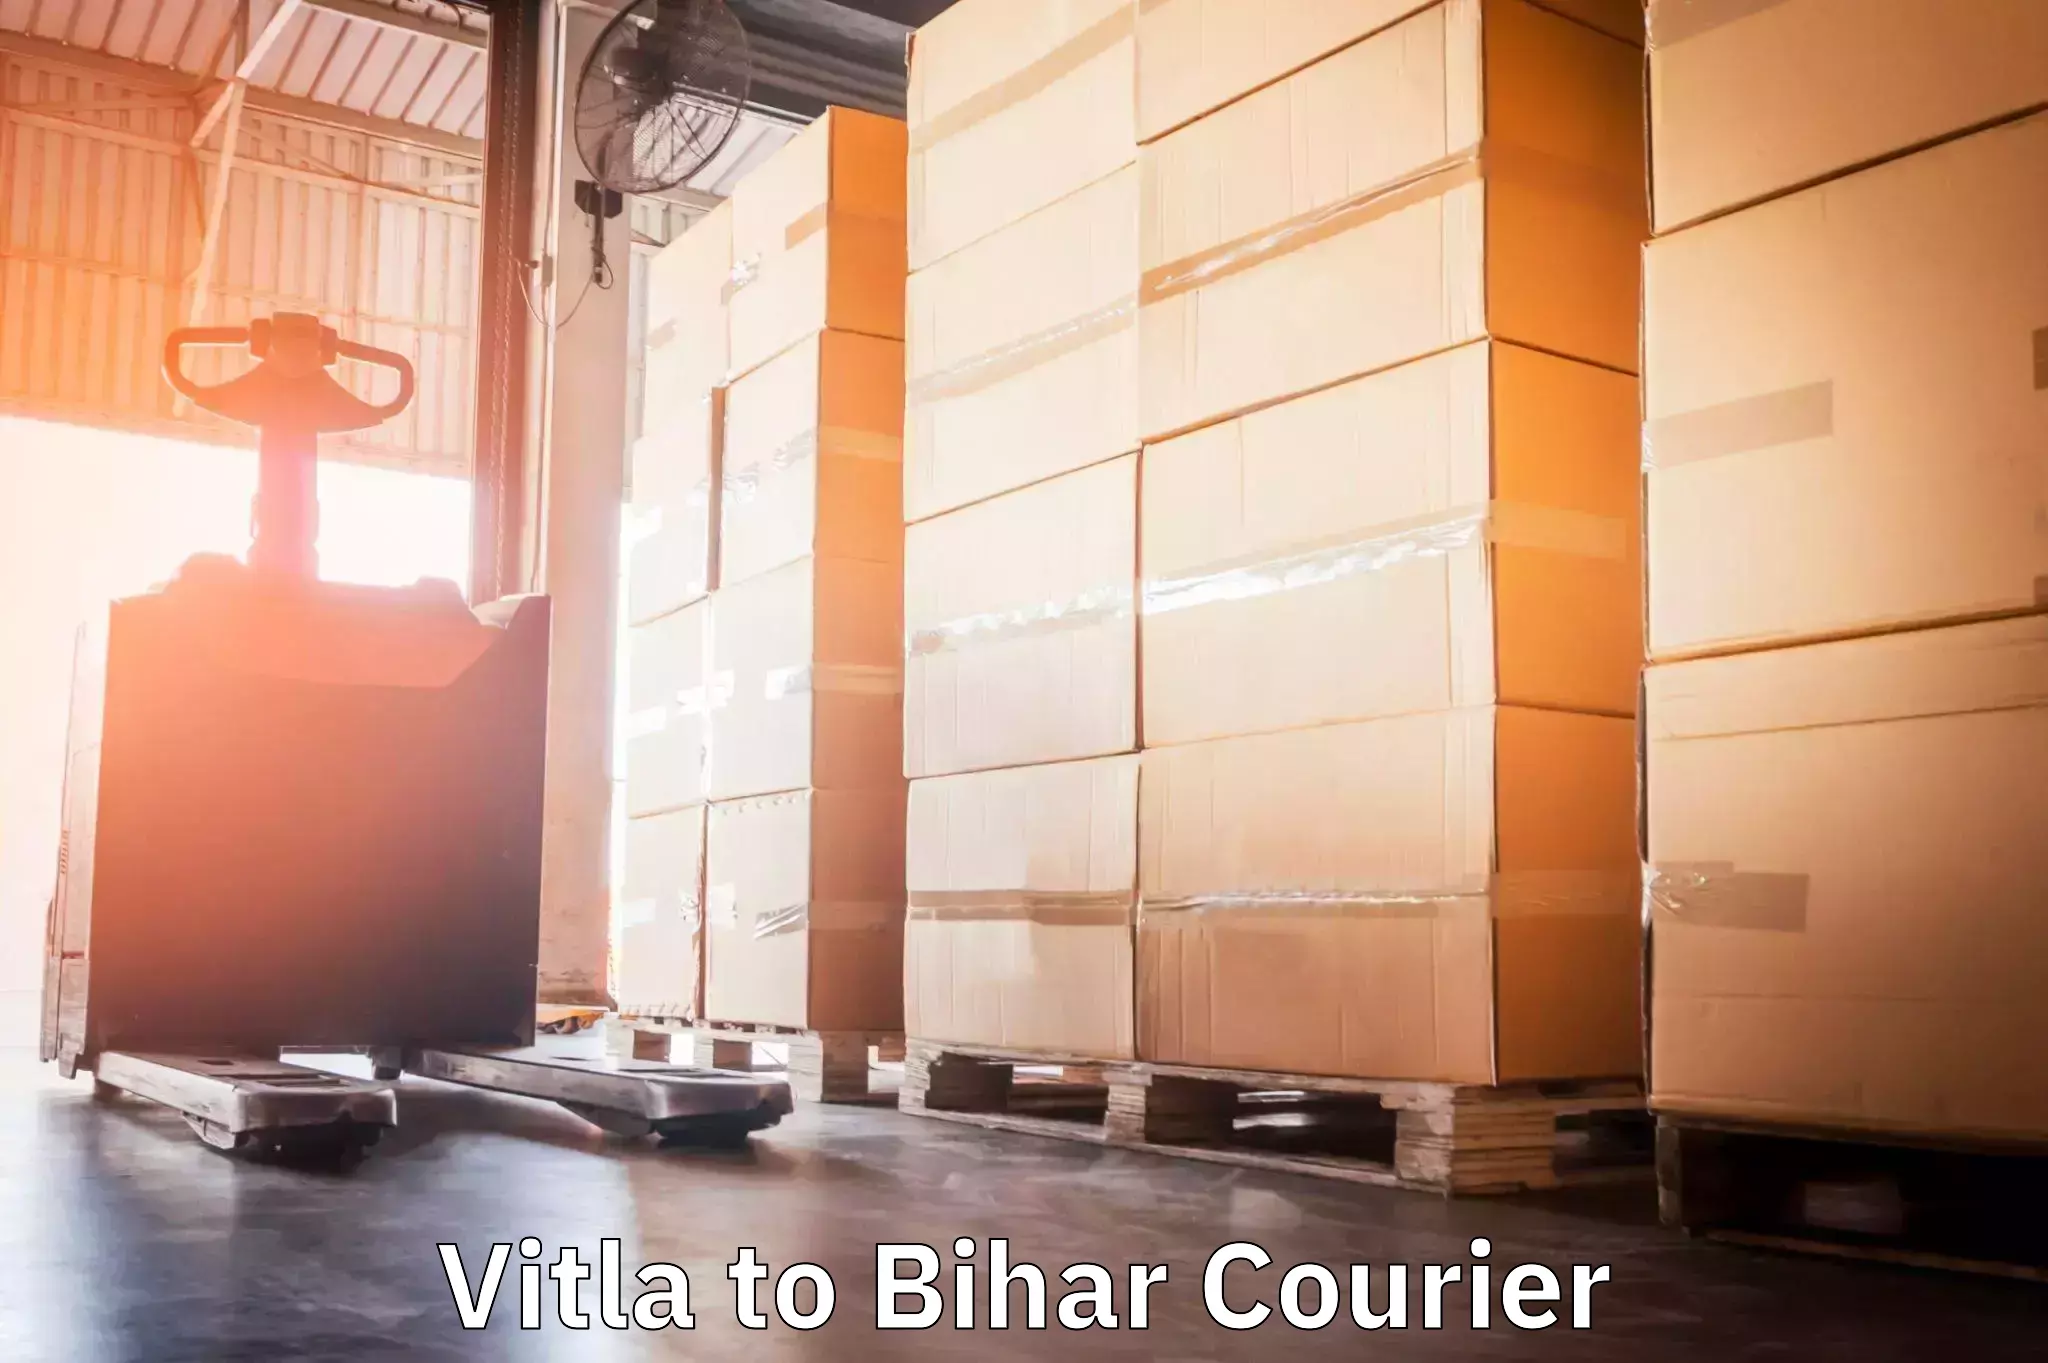 State-of-the-art courier technology in Vitla to Bhorey